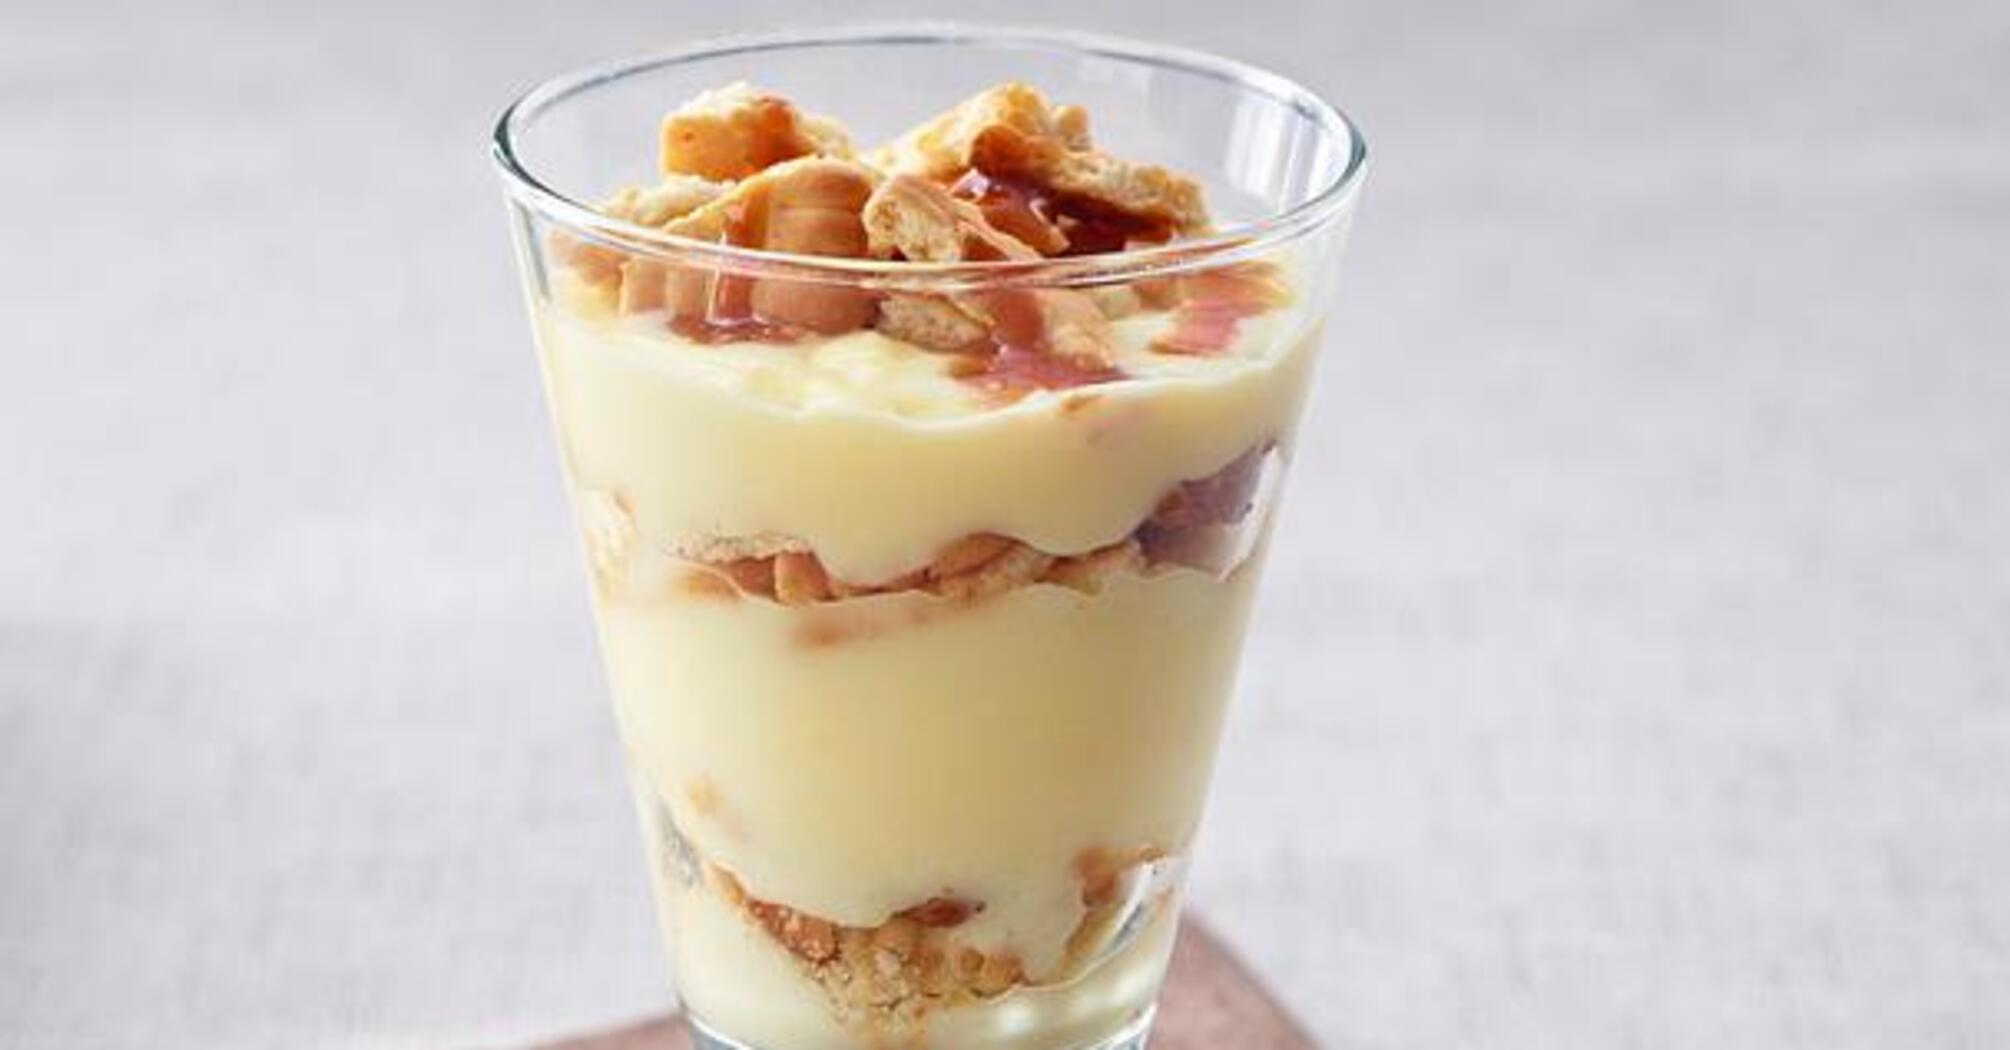 Dessert in a glass: no need to bake